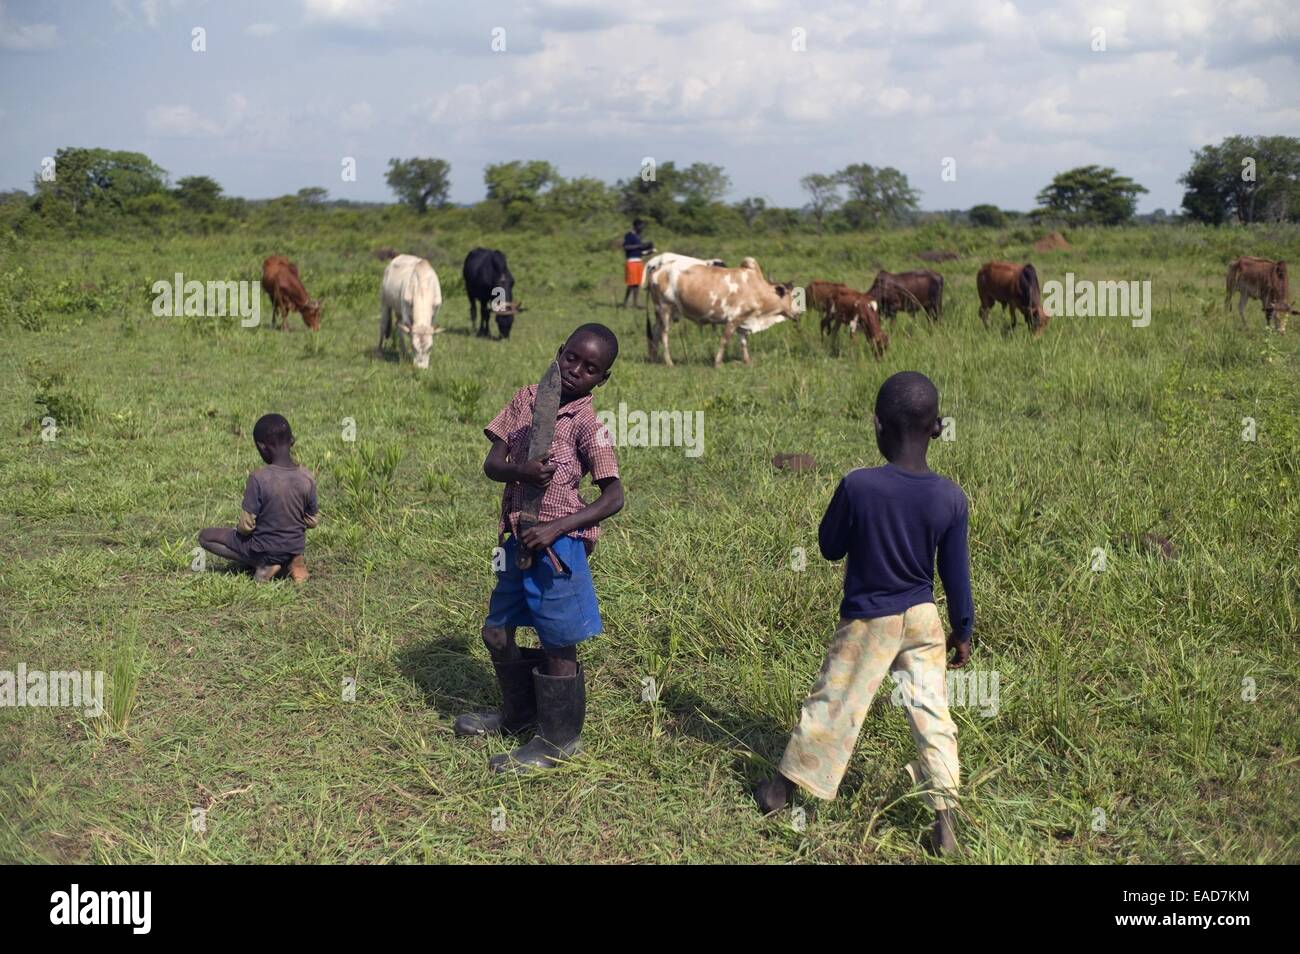 Obolokome Village, Agago District, Uganda. 18th July, 2014. July 18, 2014 - Obolokome Village (Agago District) - Okidi Ben, 8, right, and Olanya Alfred, 10, center, along with two other brothers watch over the family's herd of cattle; all the brothers missed school today because of this chore. The hidden cost of schooling is overwhelming in the post-conflict Acholi sub-region. Children constitute an invaluable source of stopgap labour for households re-establishing livelihood strategies. © Ric Francis/ZUMA Wire/Alamy Live News Stock Photo